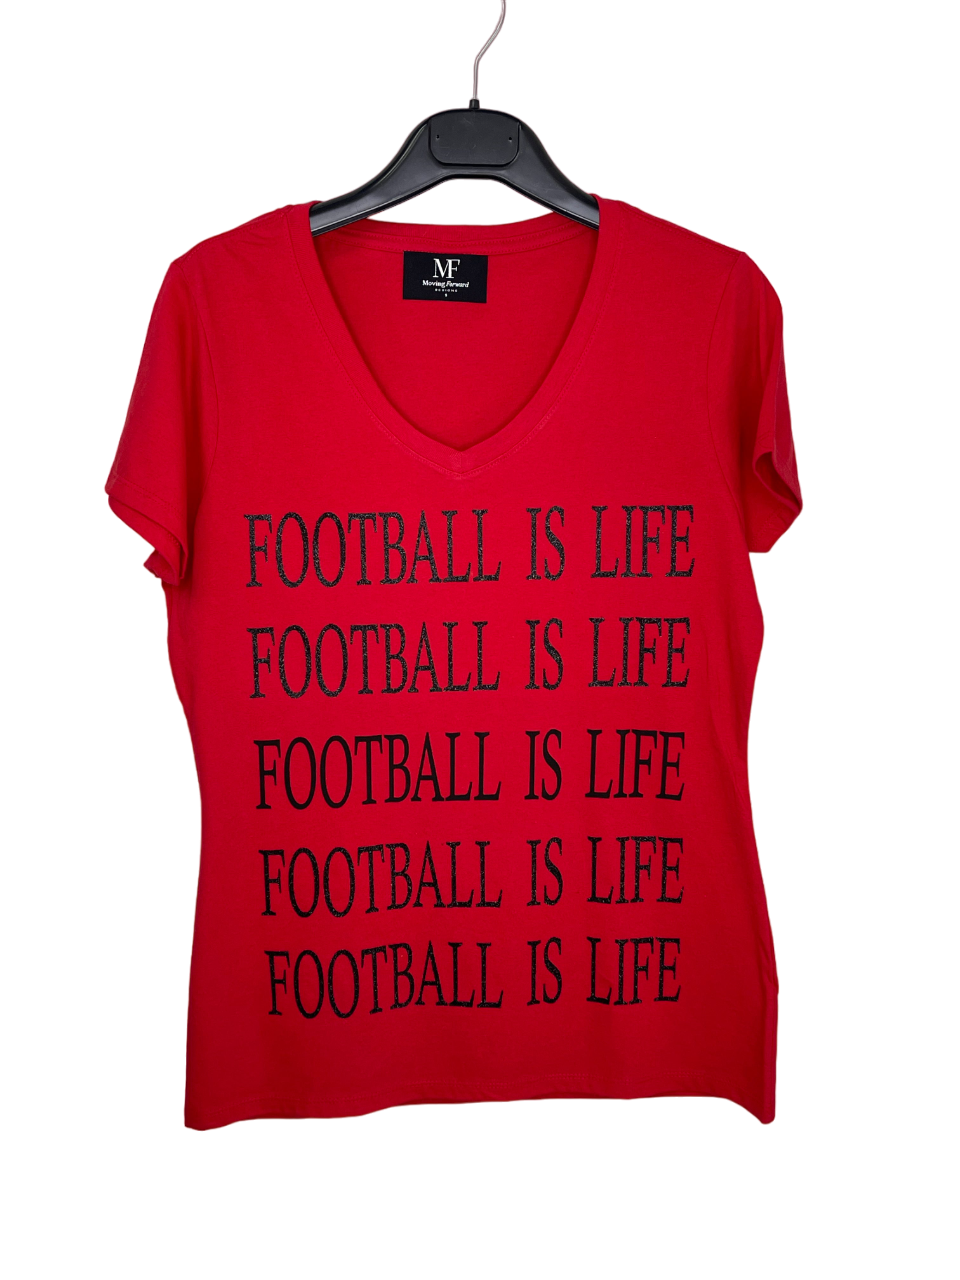 Game Day T-Shirt, Short Sleeve V-Neck Red, Football is Life